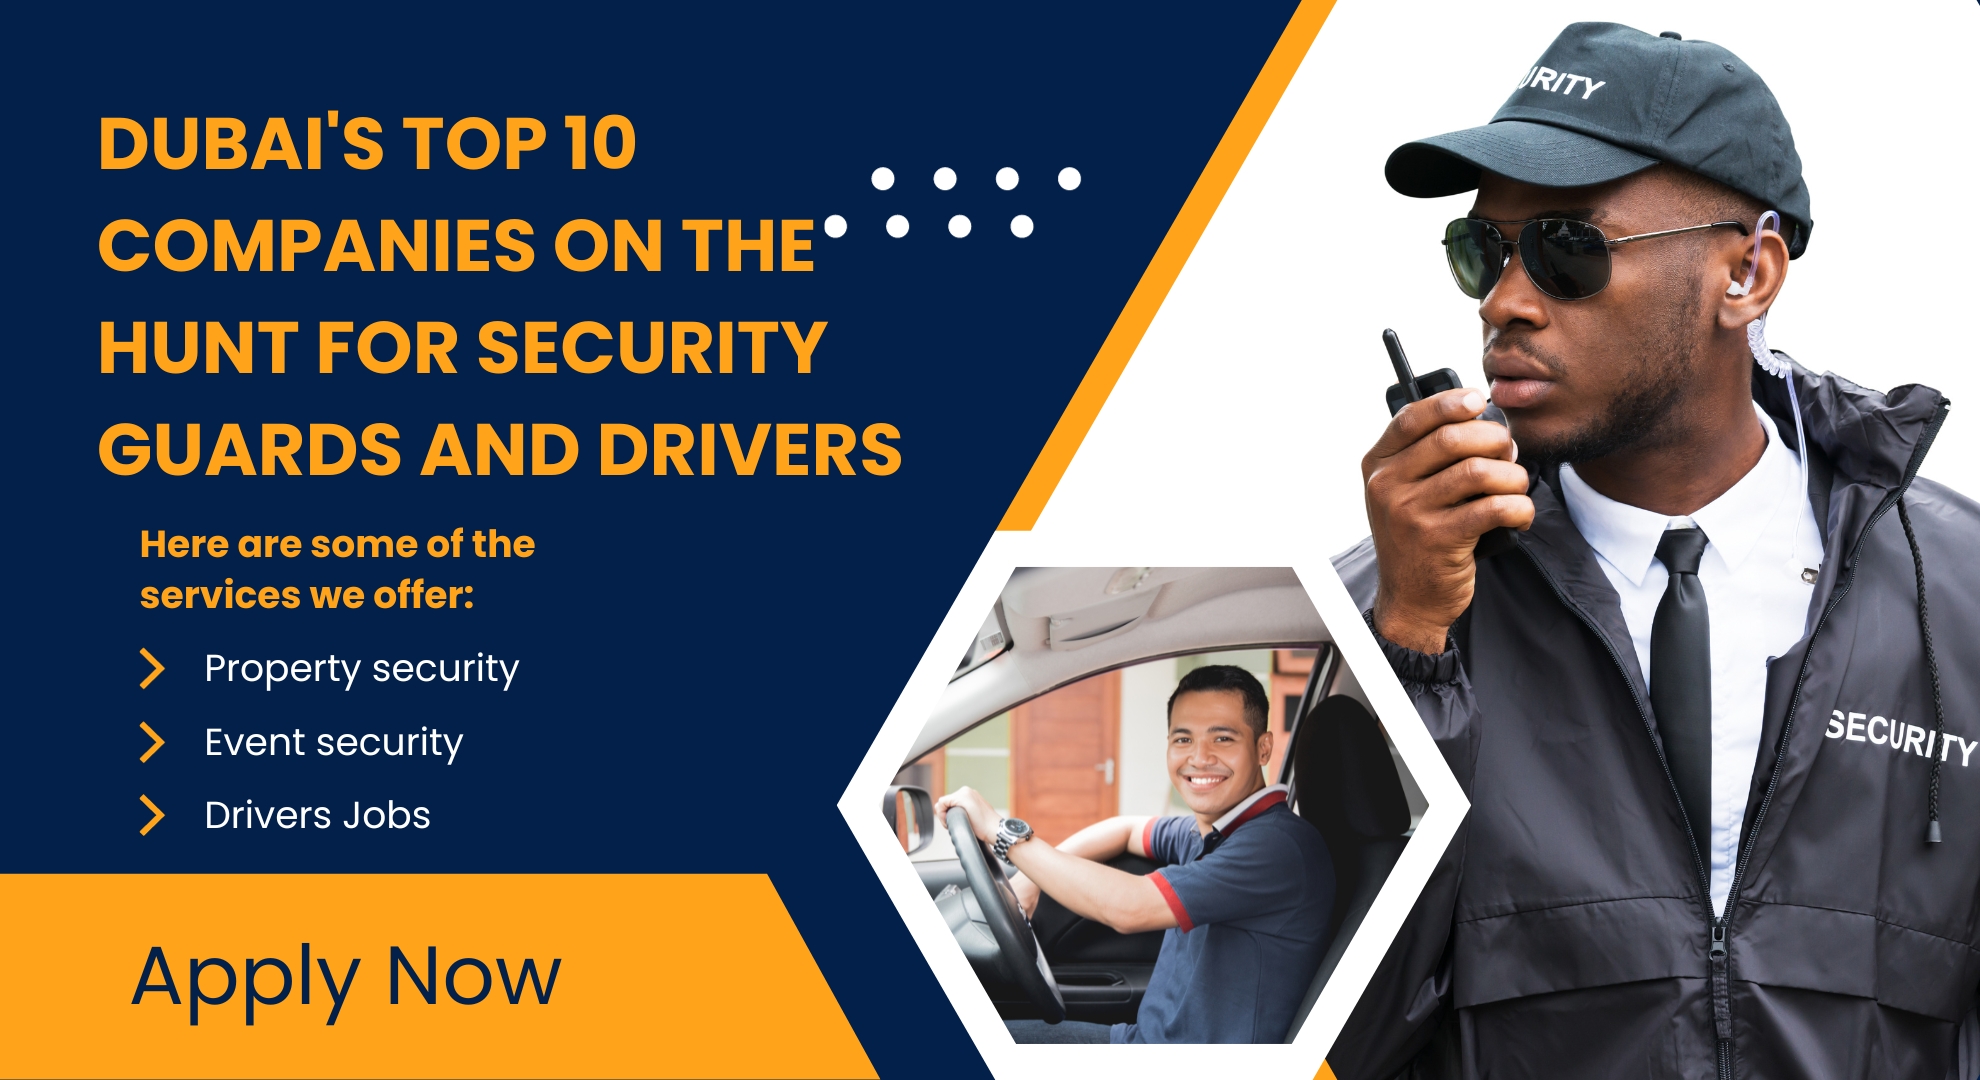 Dubai's Top 10 Companies on the Hunt for Security Guards and Drivers